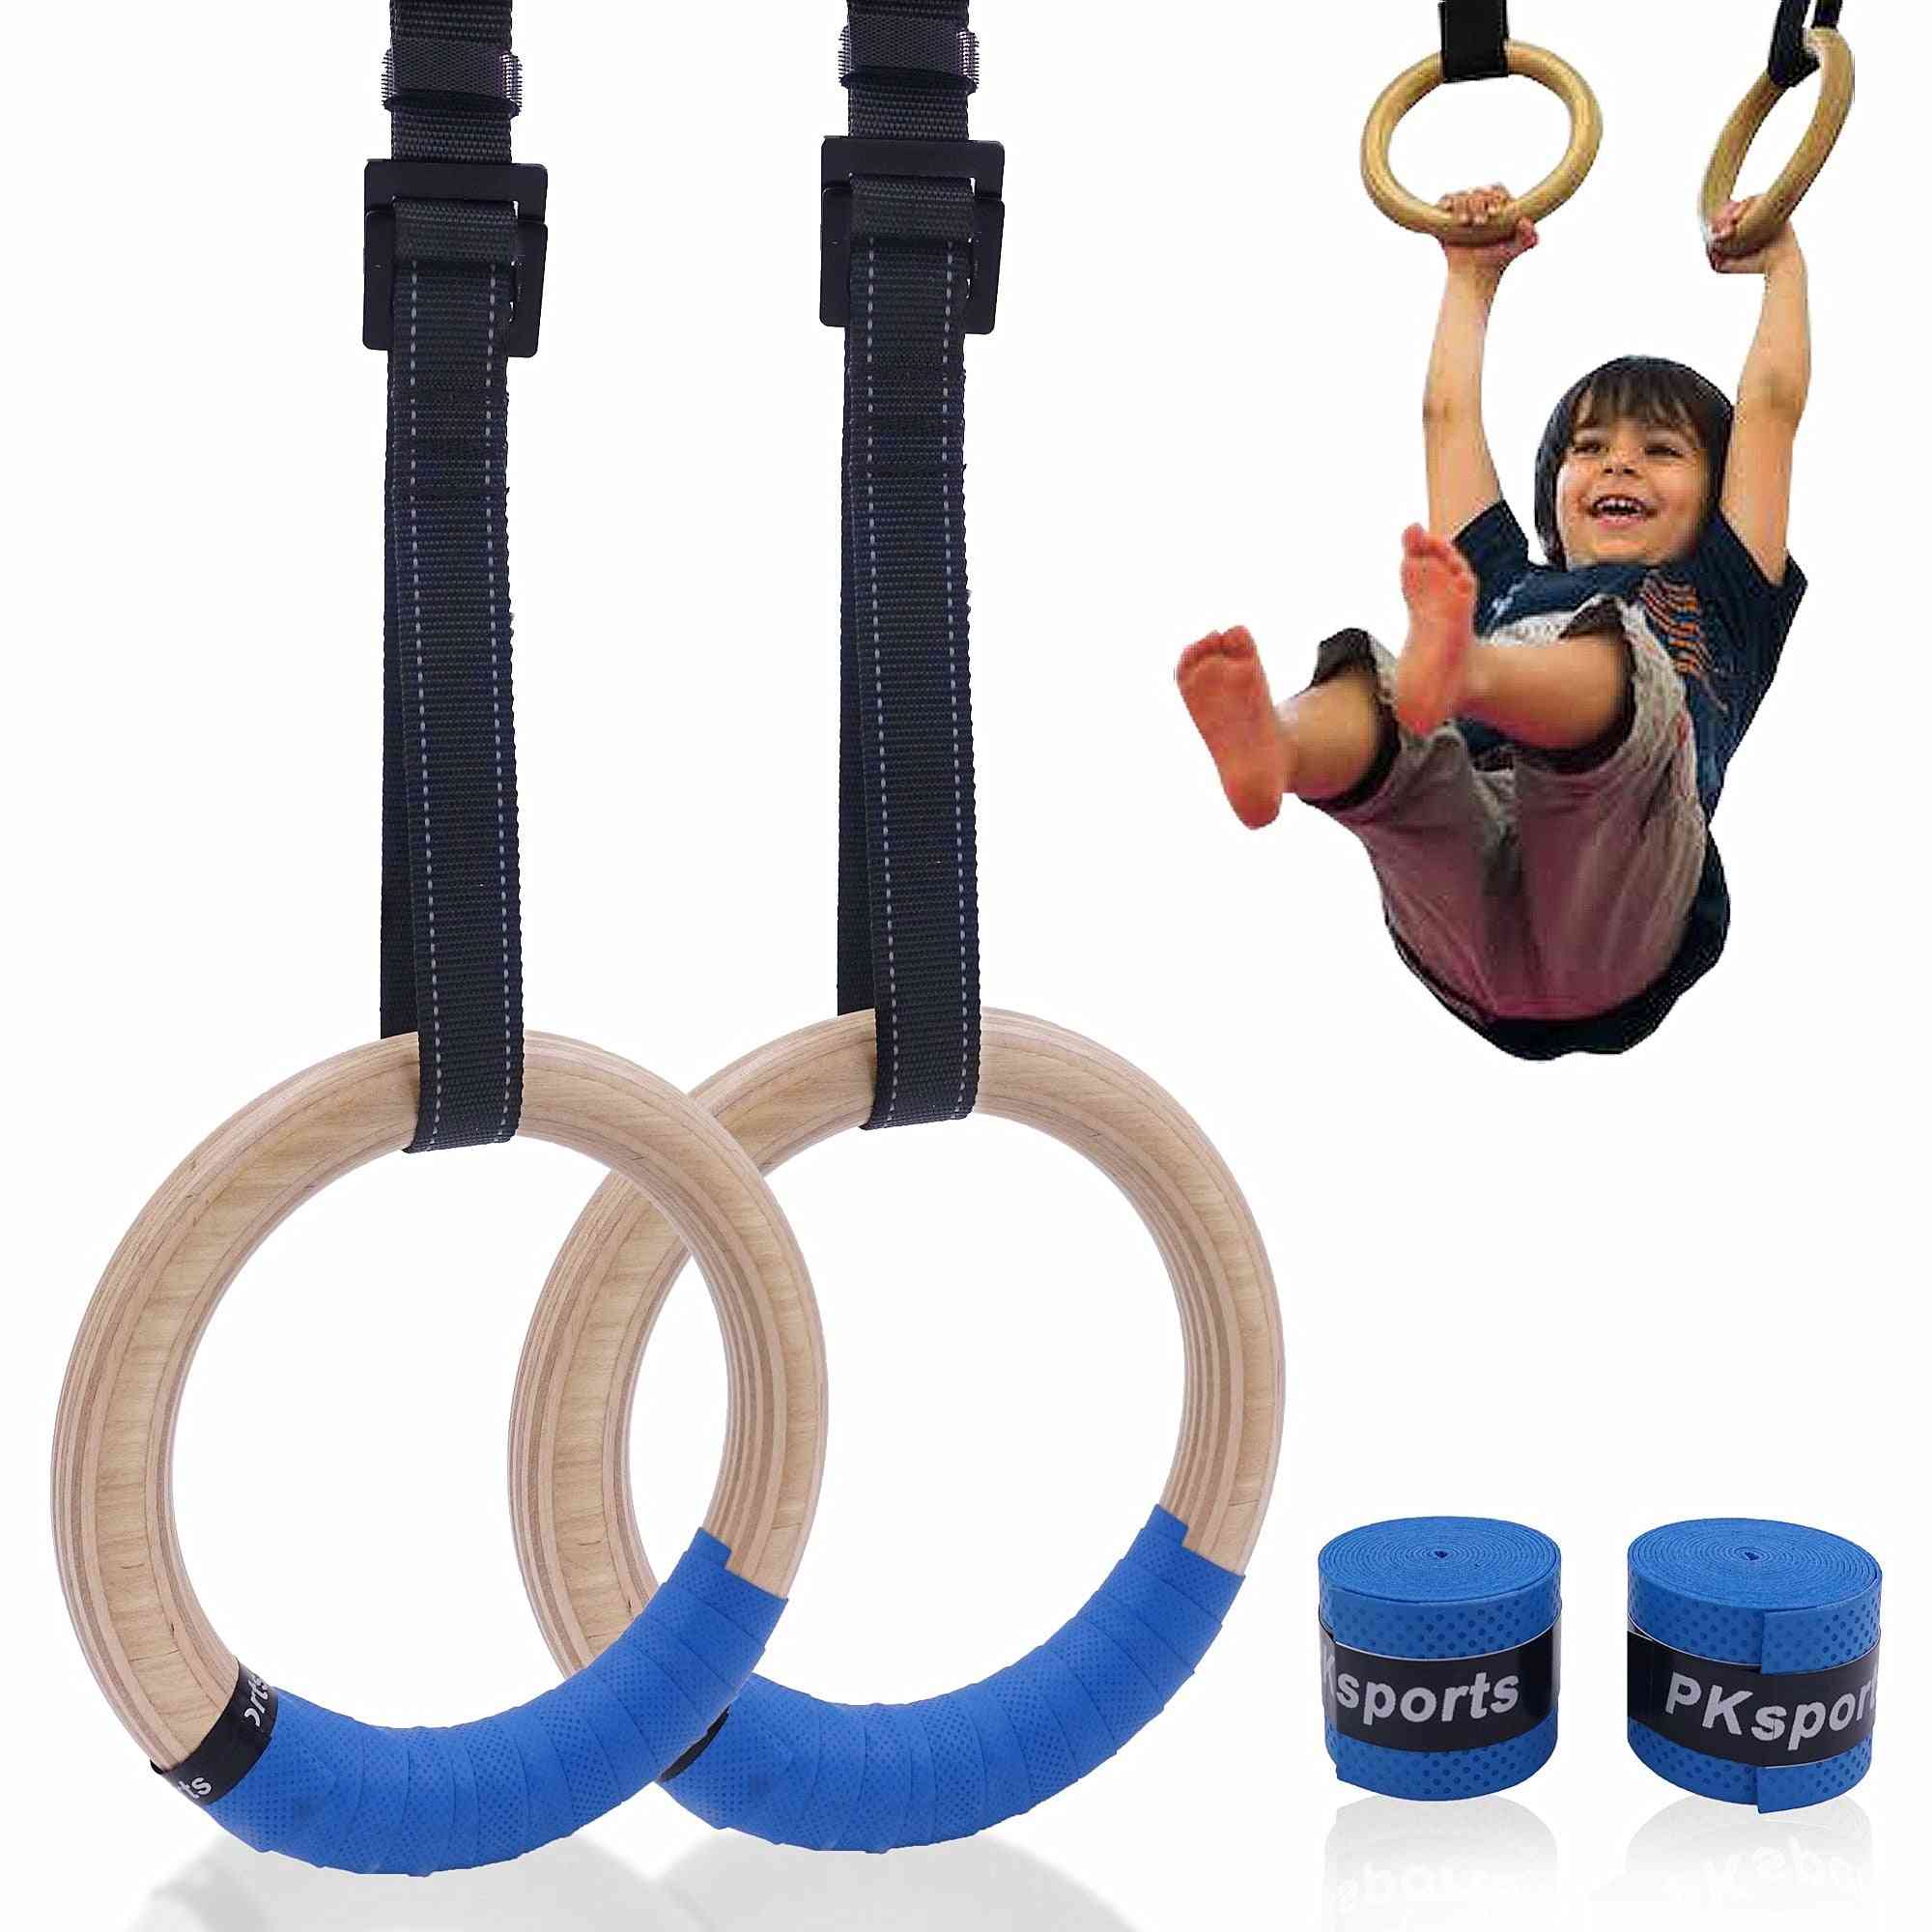 Wooden Gymnastic Rings For Kids With Adjustable Straps, Buckles